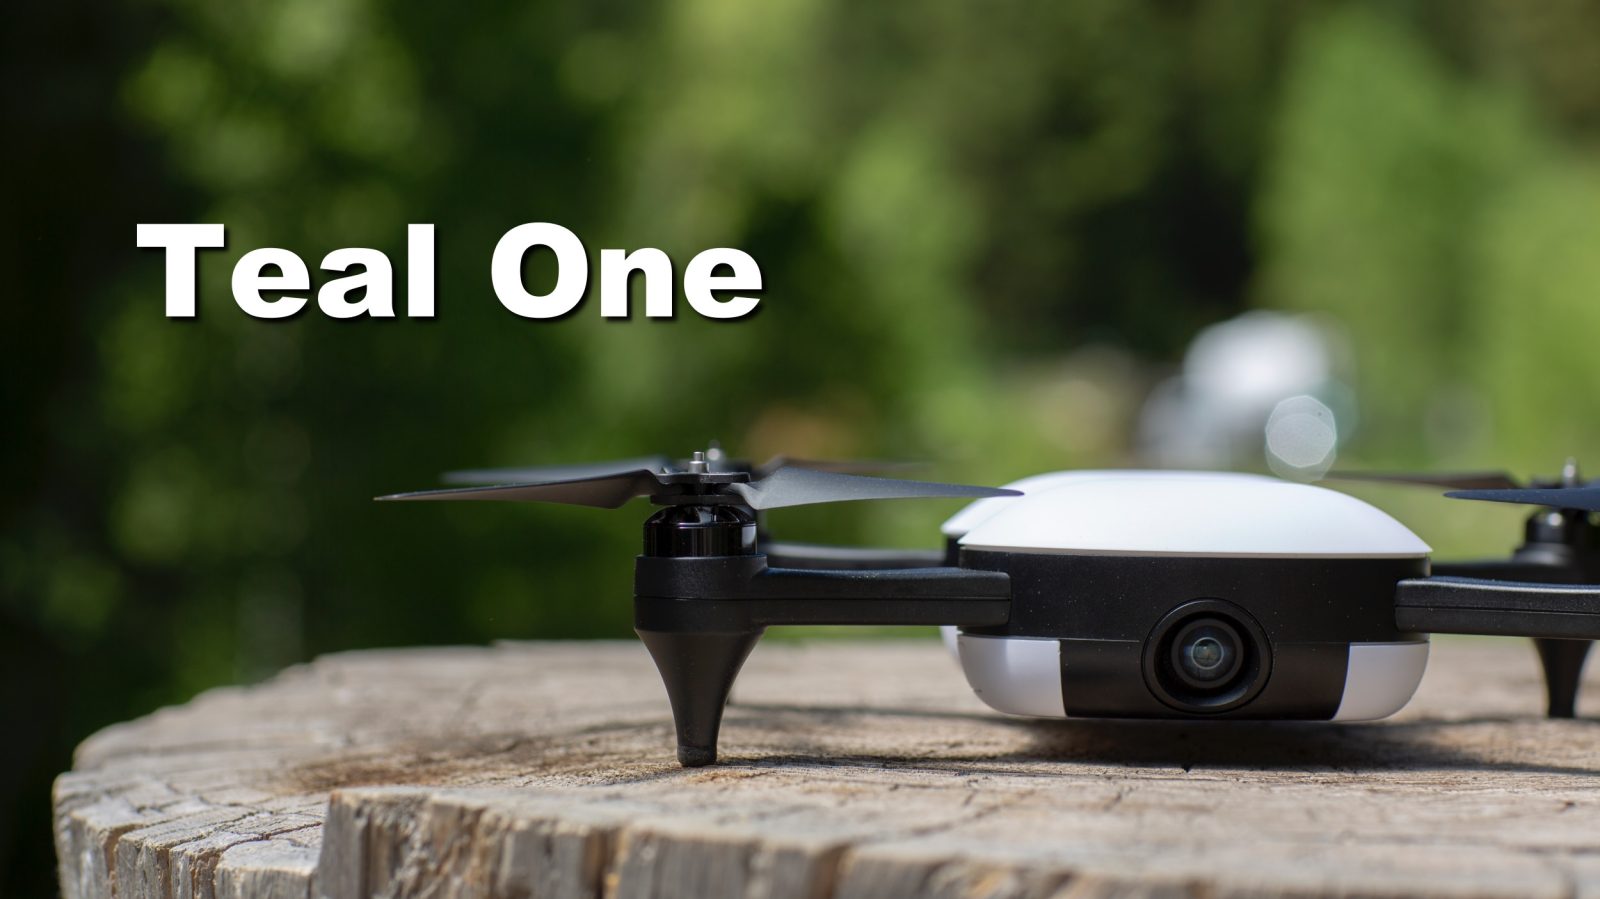 Teal launches their flagship drone the Teal One